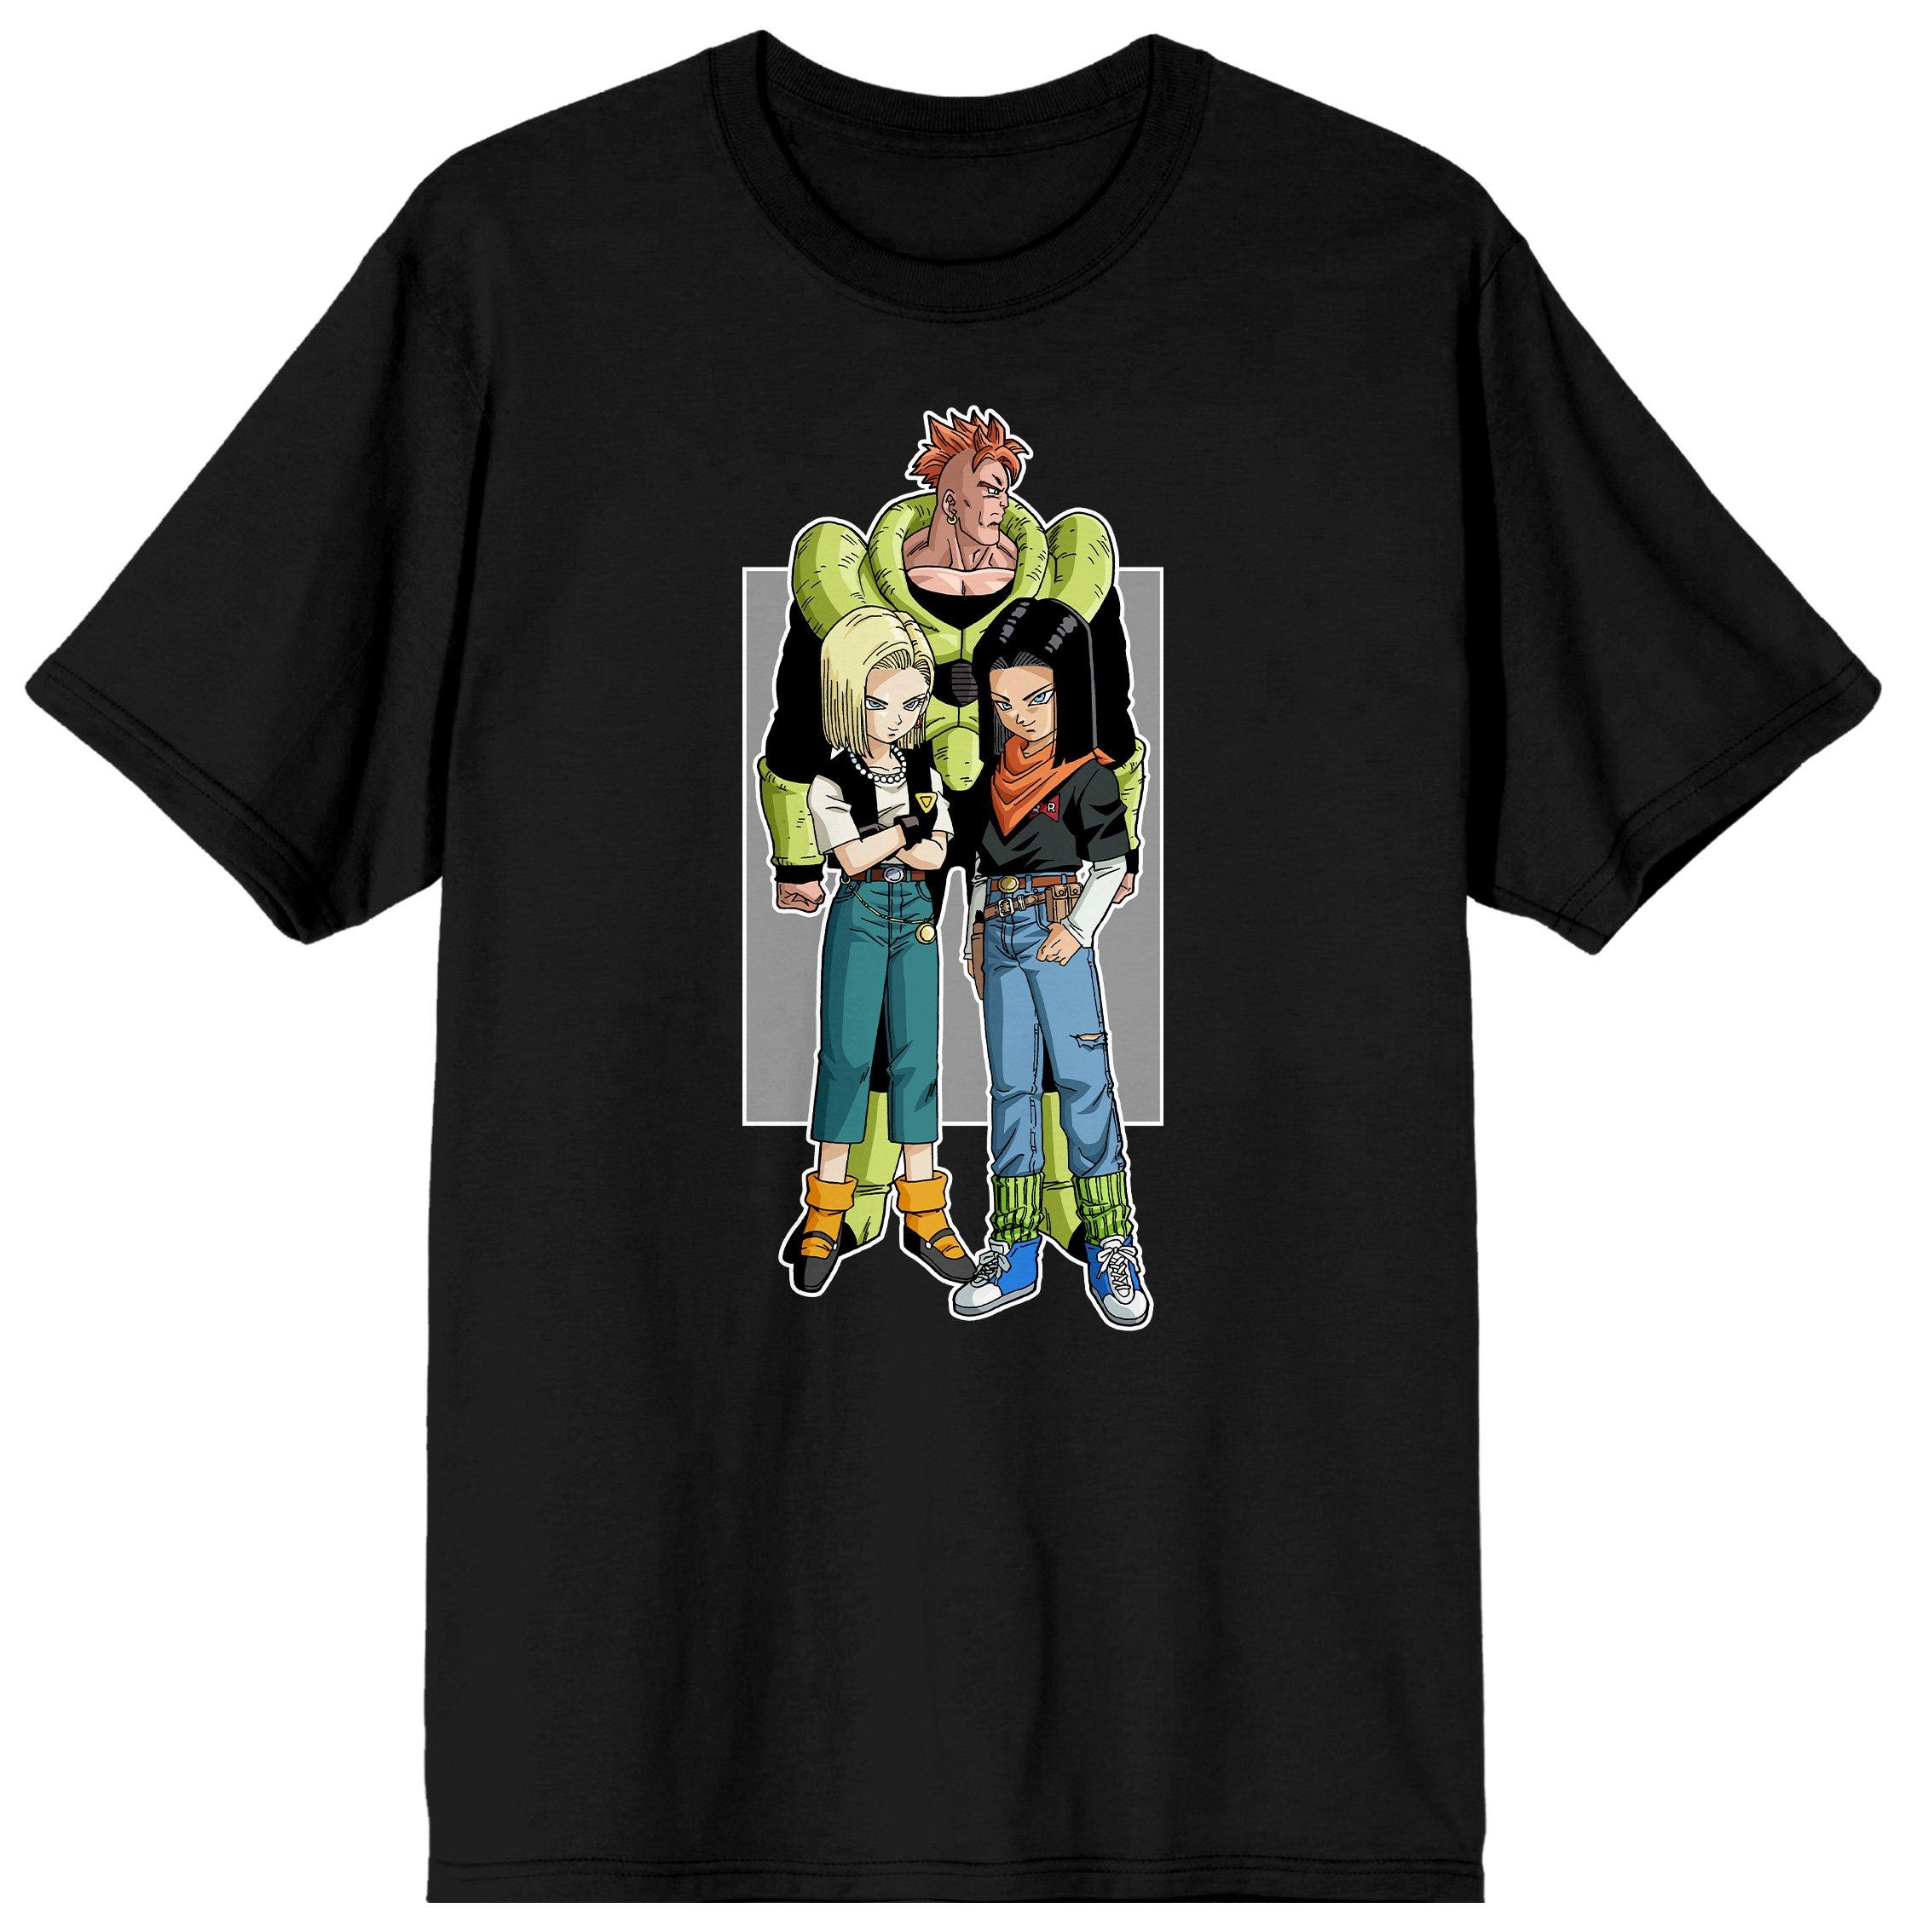 Dragon Ball Z Anime Android 16, 17, and 18 Characters Men's Black Short Sleeve T-Shirt, Size: XL, Bioworld Merchandising